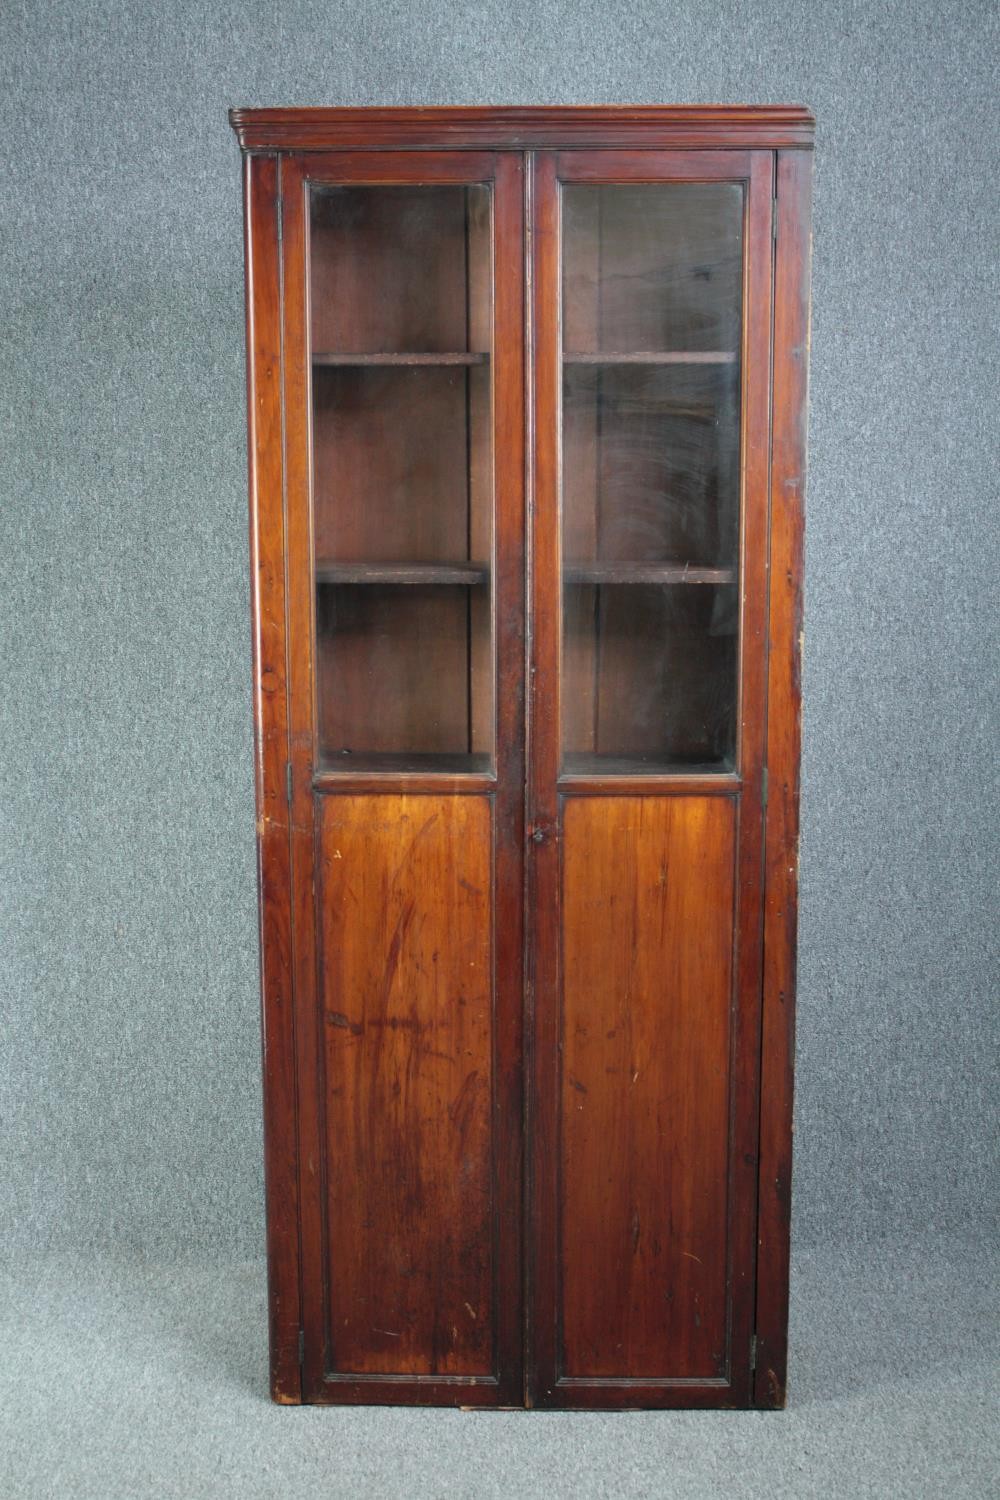 Bookcase, C,1900 stained pine. H.190 W.79 D.27cm.